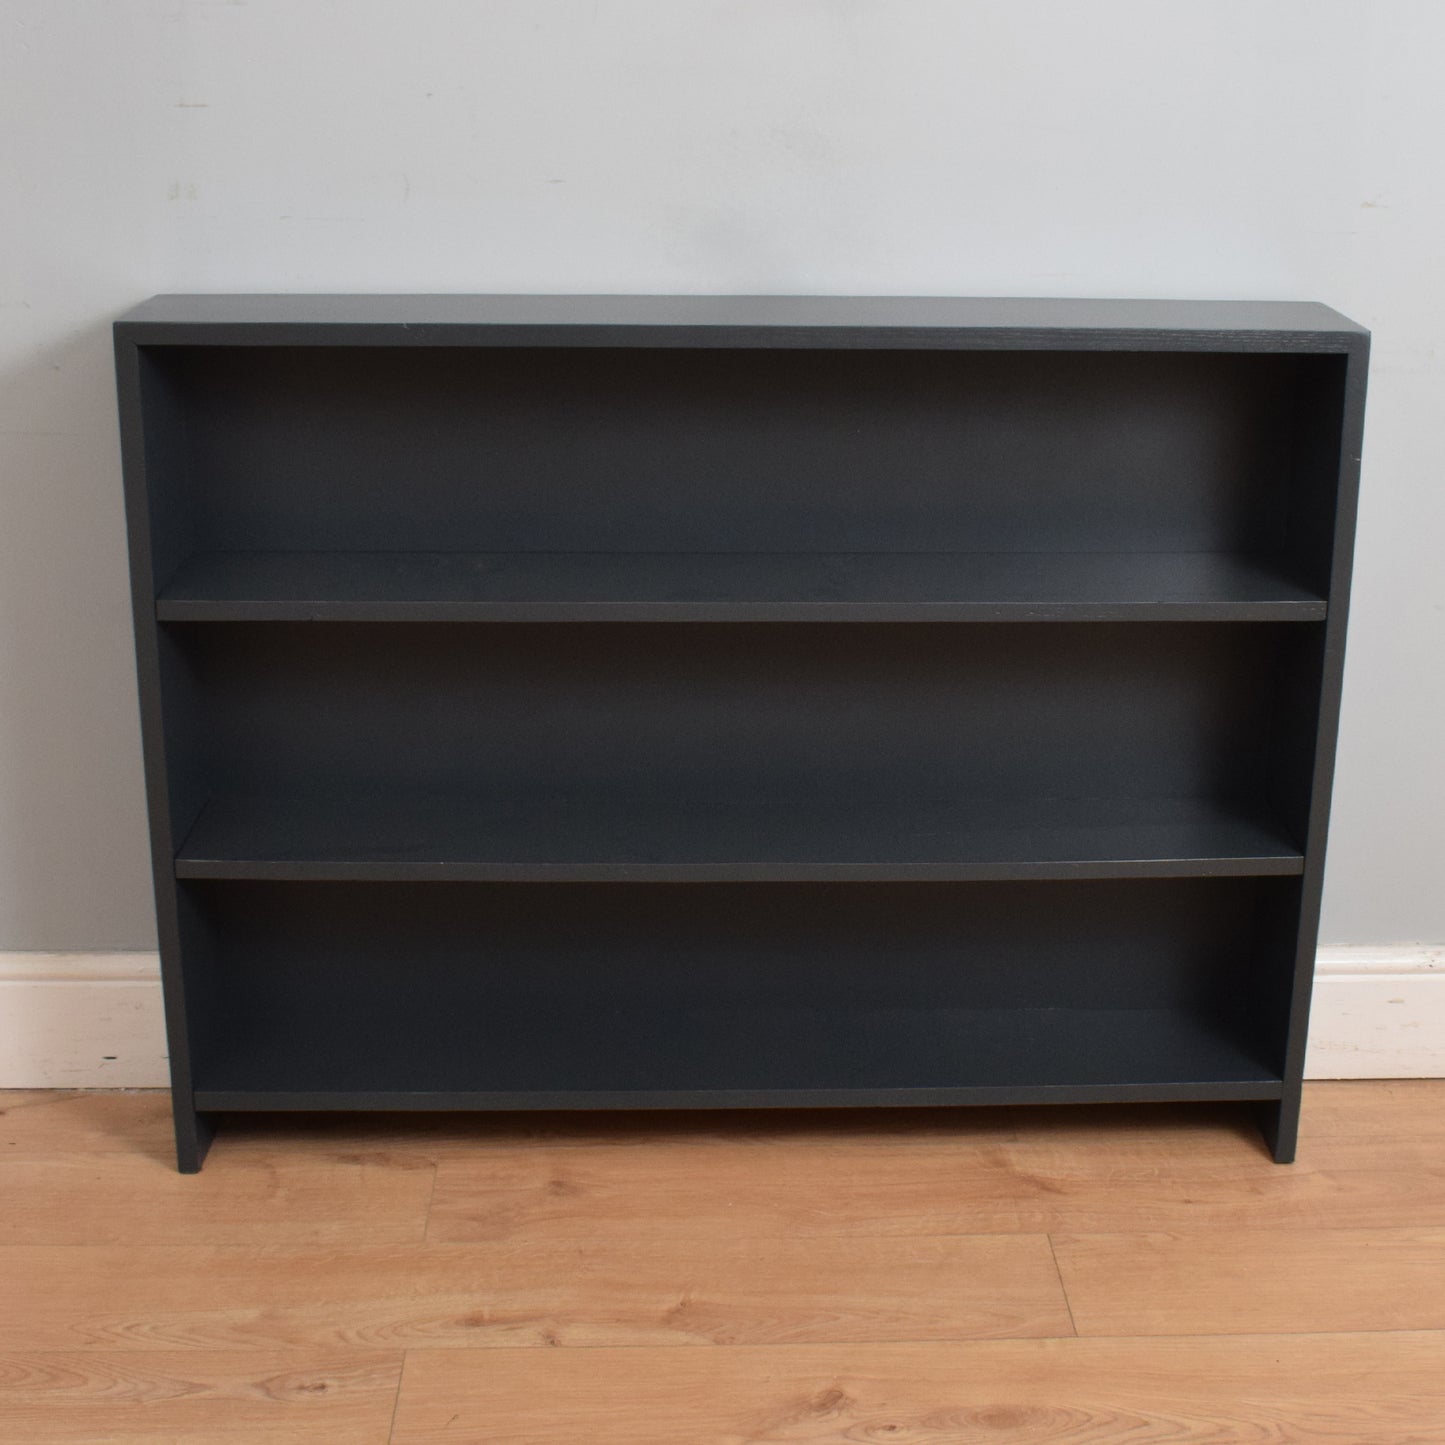 Low Painted Bookcase